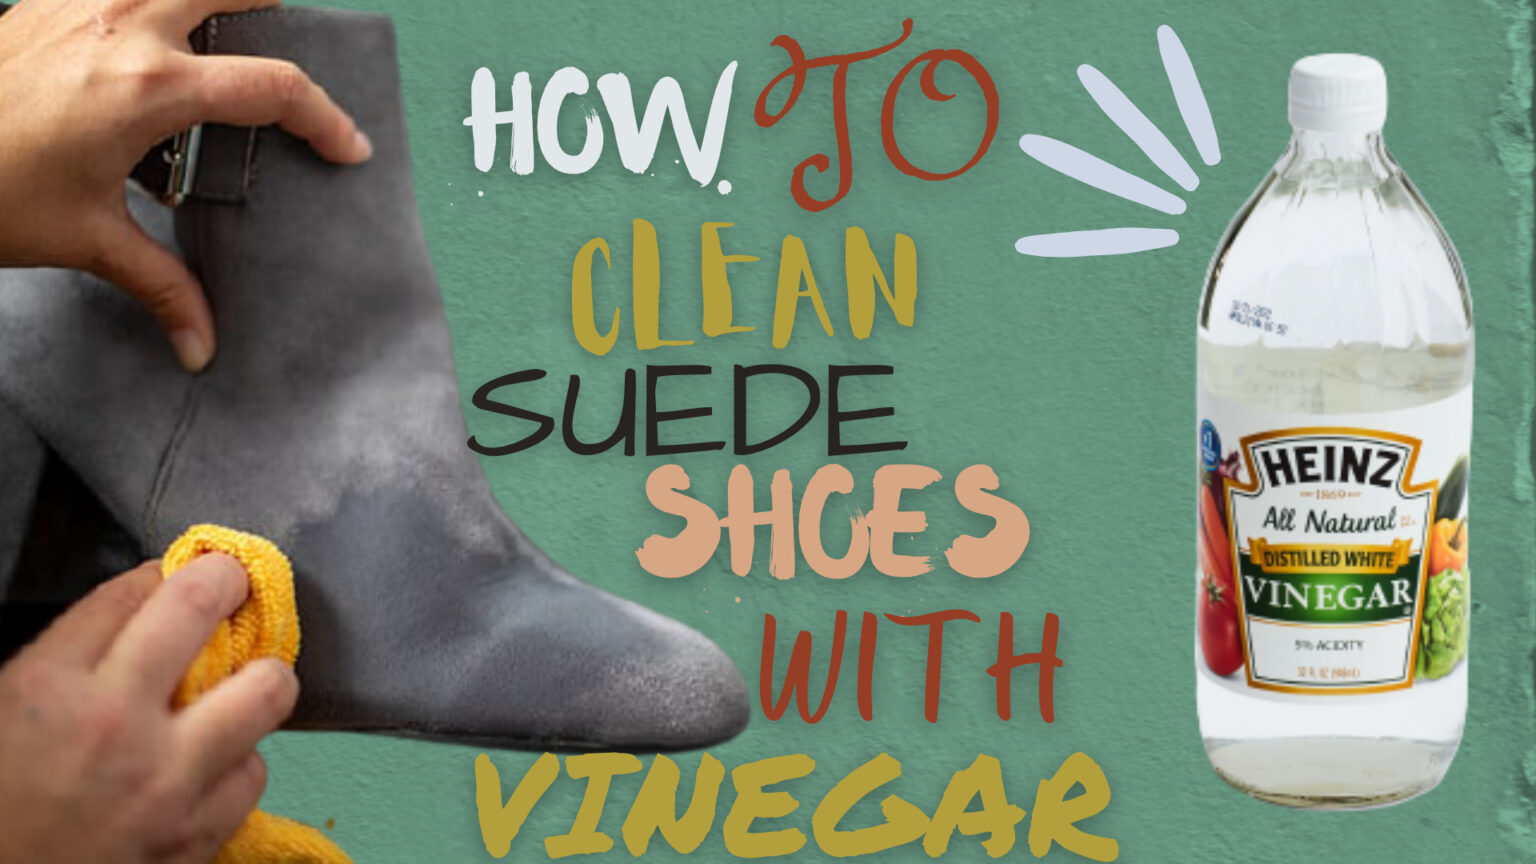 How to Clean Suede Shoes with Vinegar? DIY Home Guide